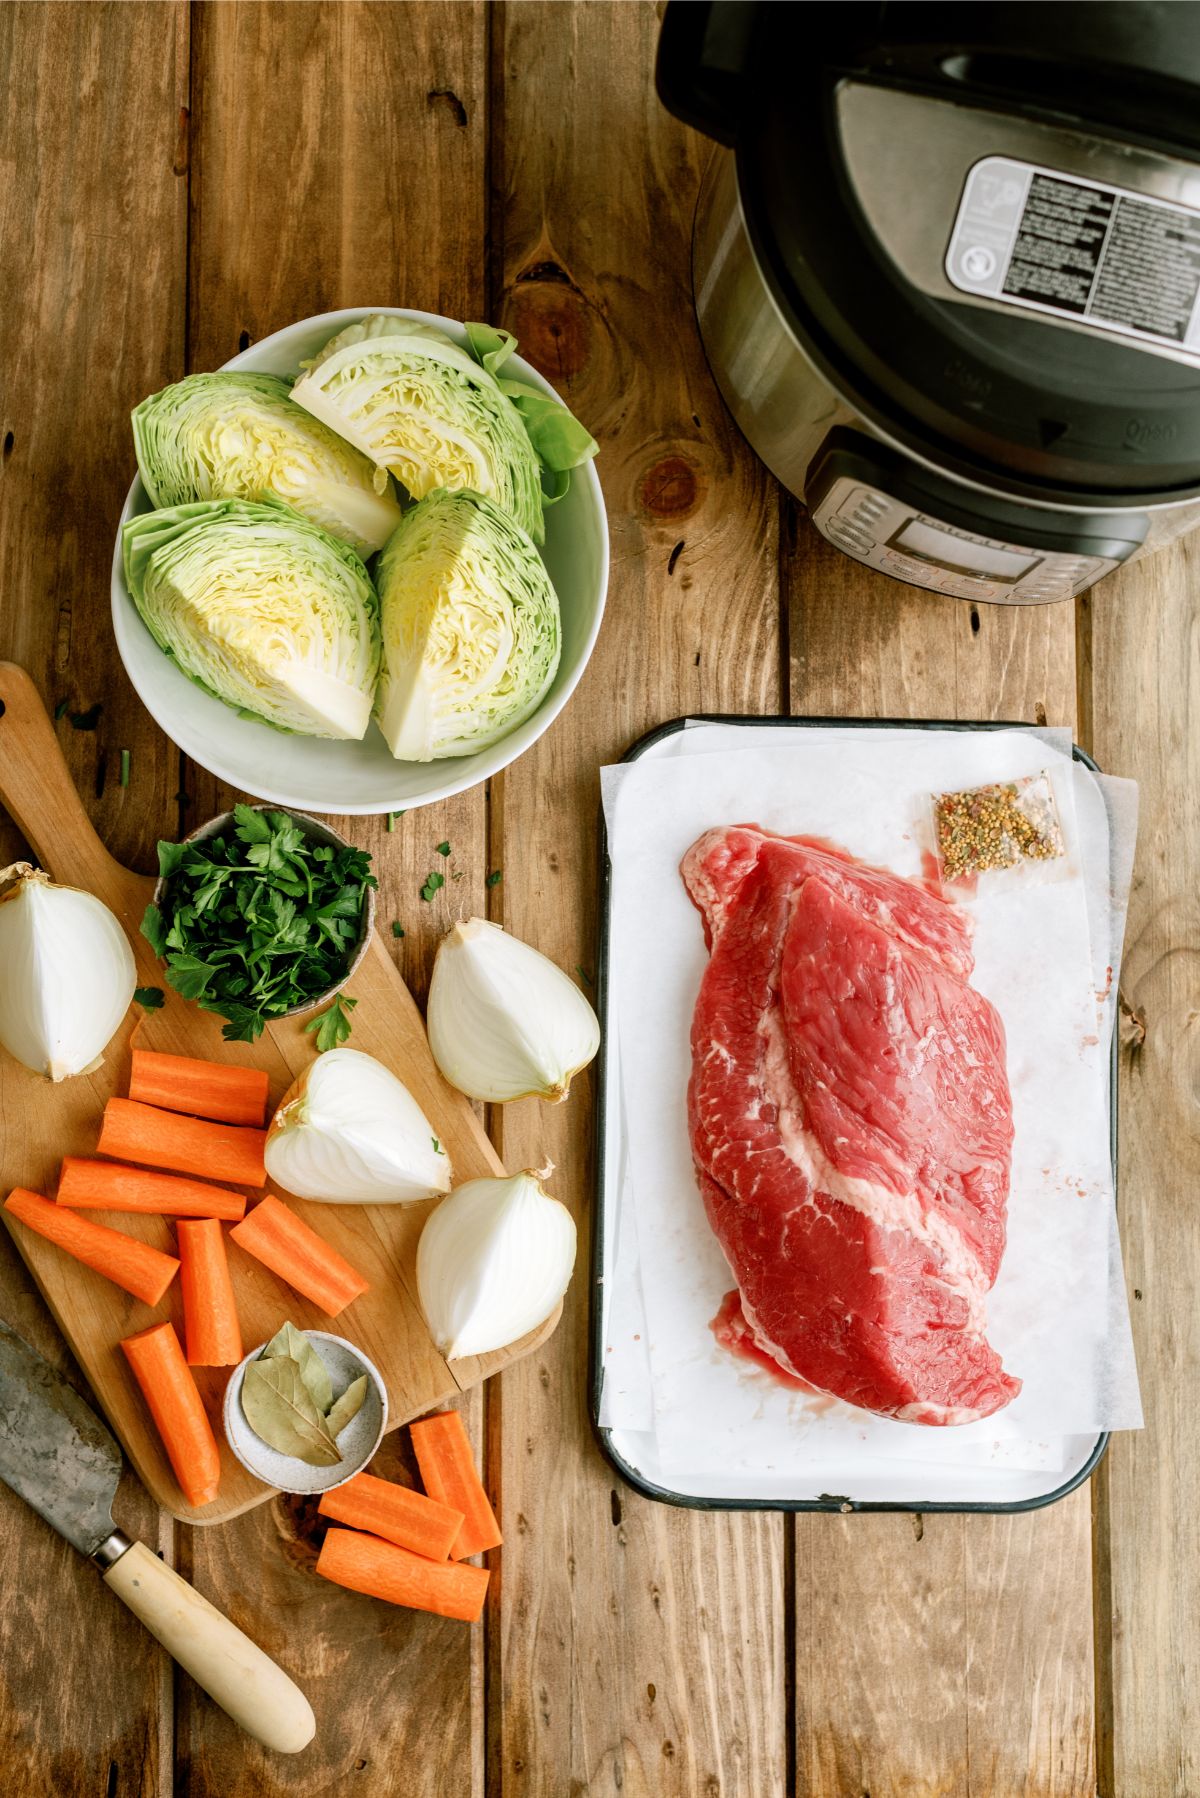 Ingredients needed to make Instant Pot Corned Beef and Cabbage